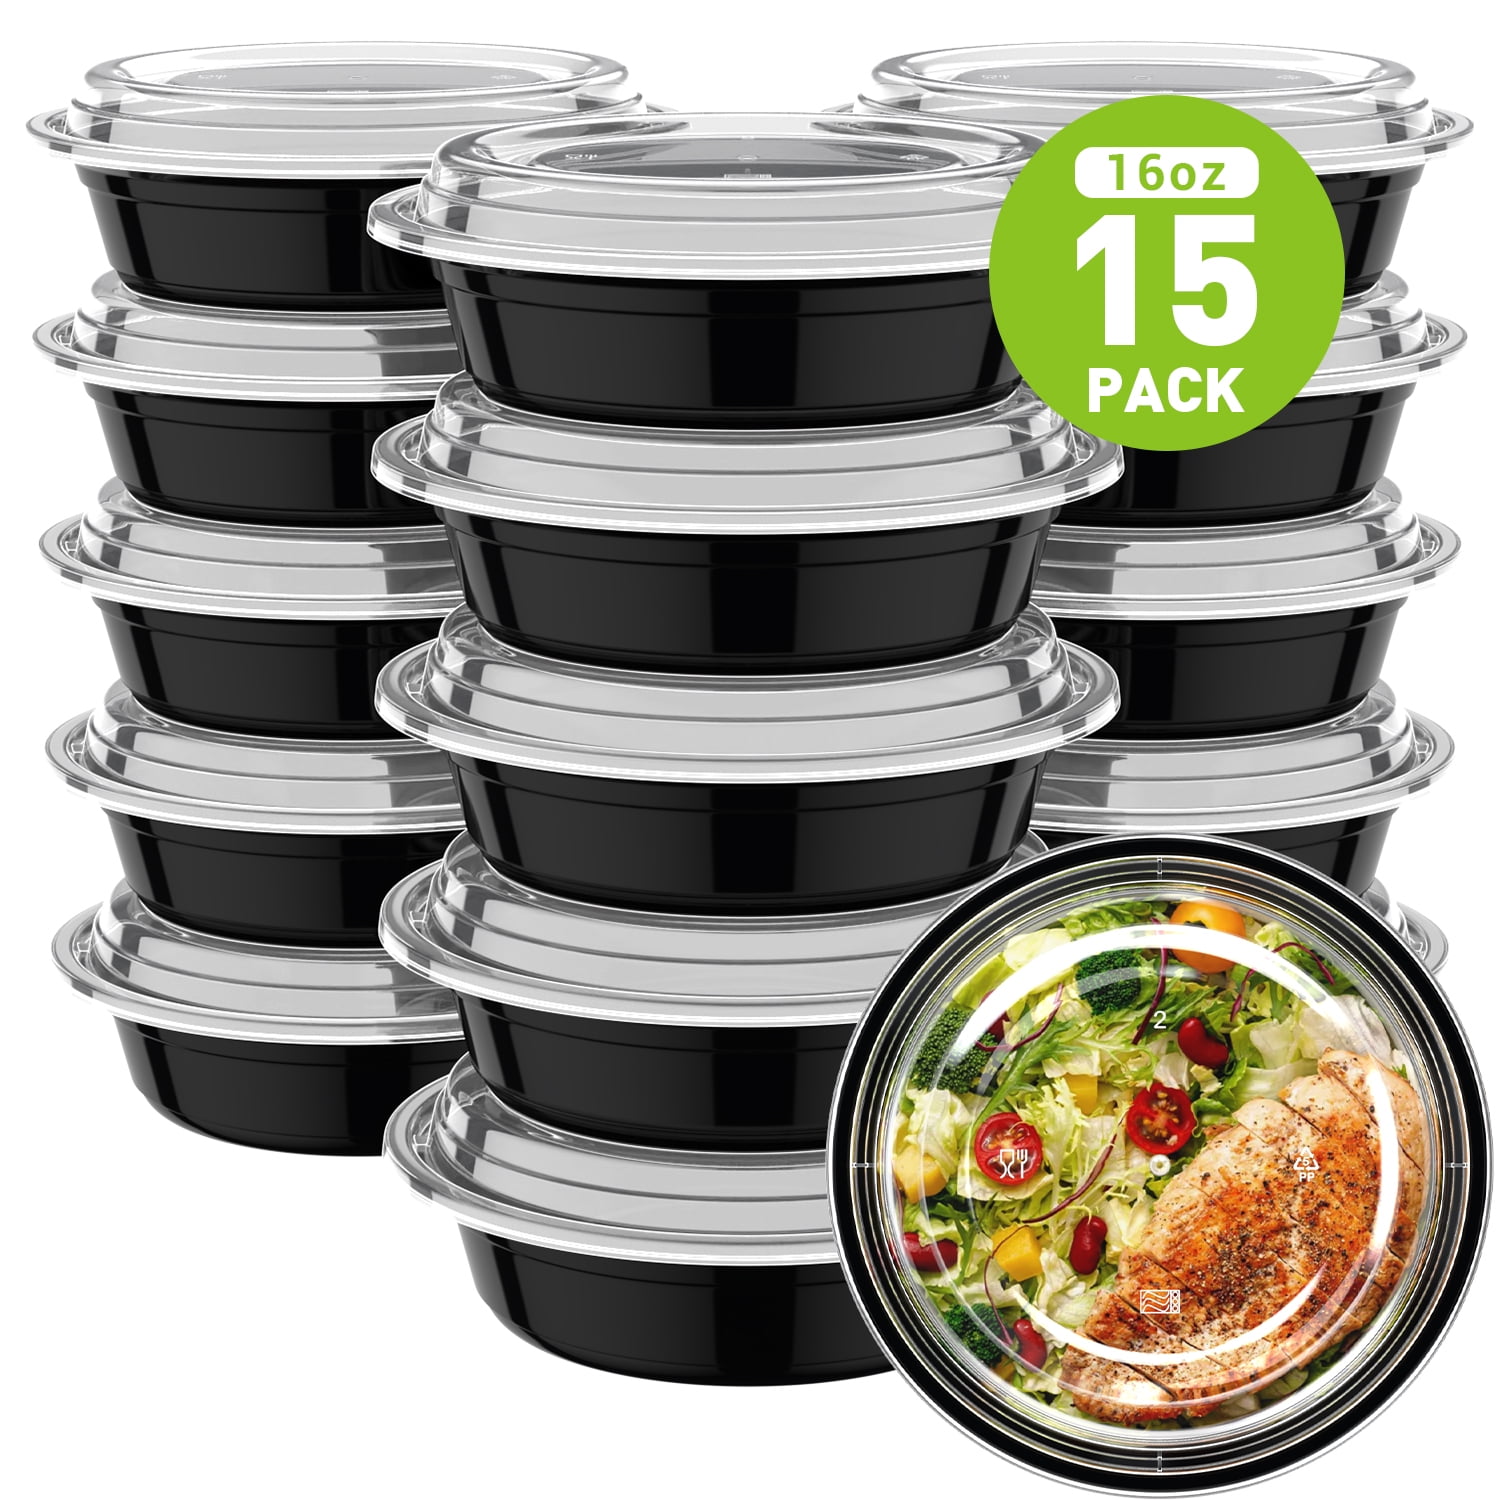 Glotoch 50 Pack 【32oz 2 Compartment】 Meal Prep Container Microwave Safe,  Food Prep Containers With Lids For Lunch/Deli/Takeout/Leftover, BPA-Free  Freezer & Dishwasher Safe, Black - Yahoo Shopping